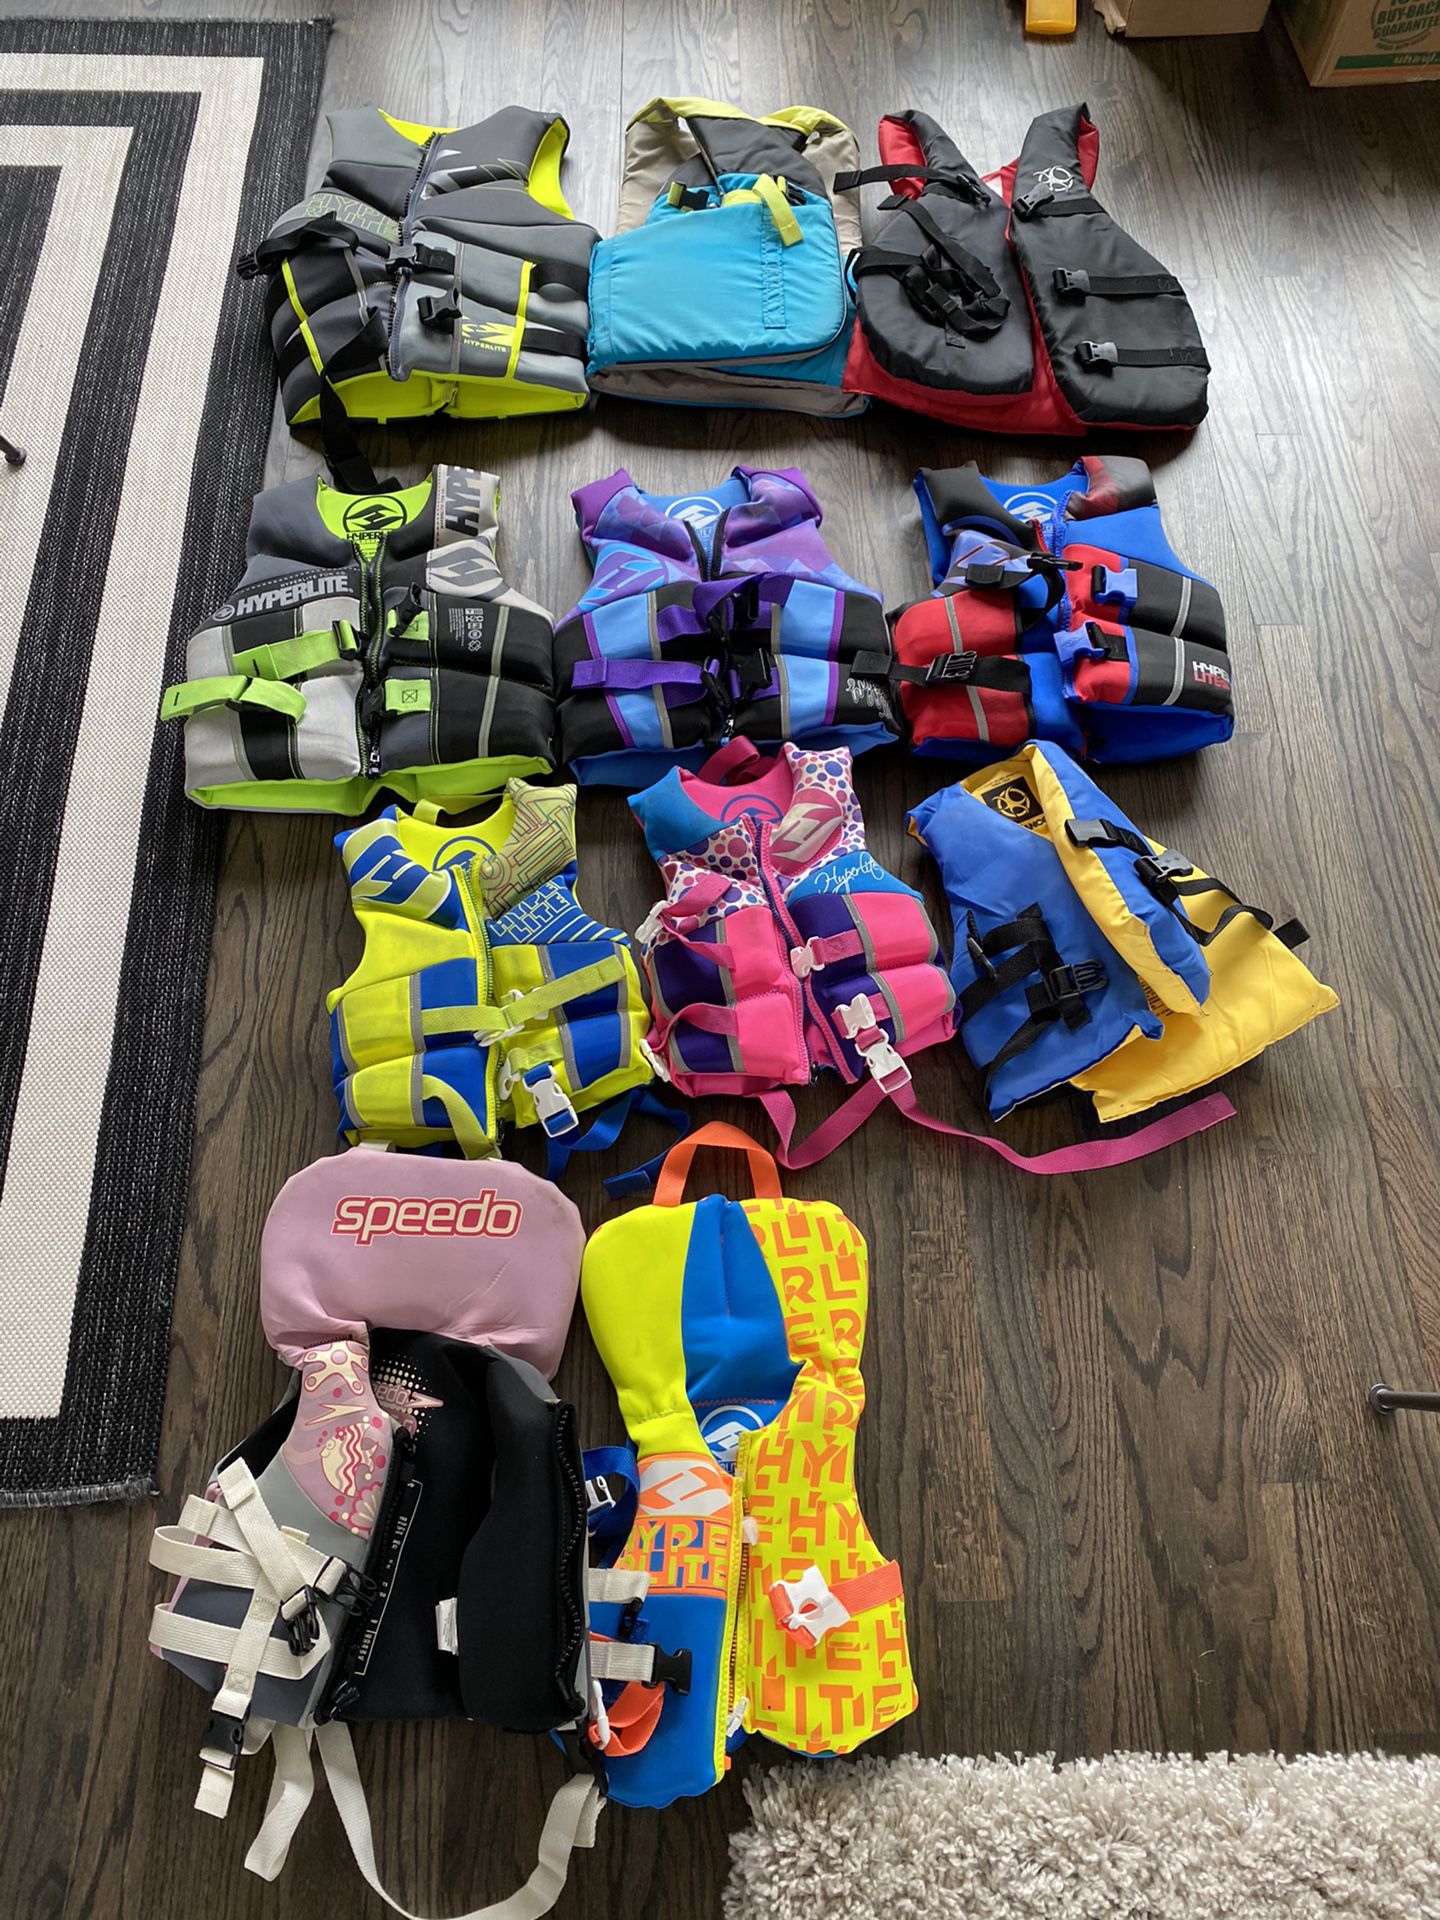 Assorted life jackets — adult, youth, child, infant